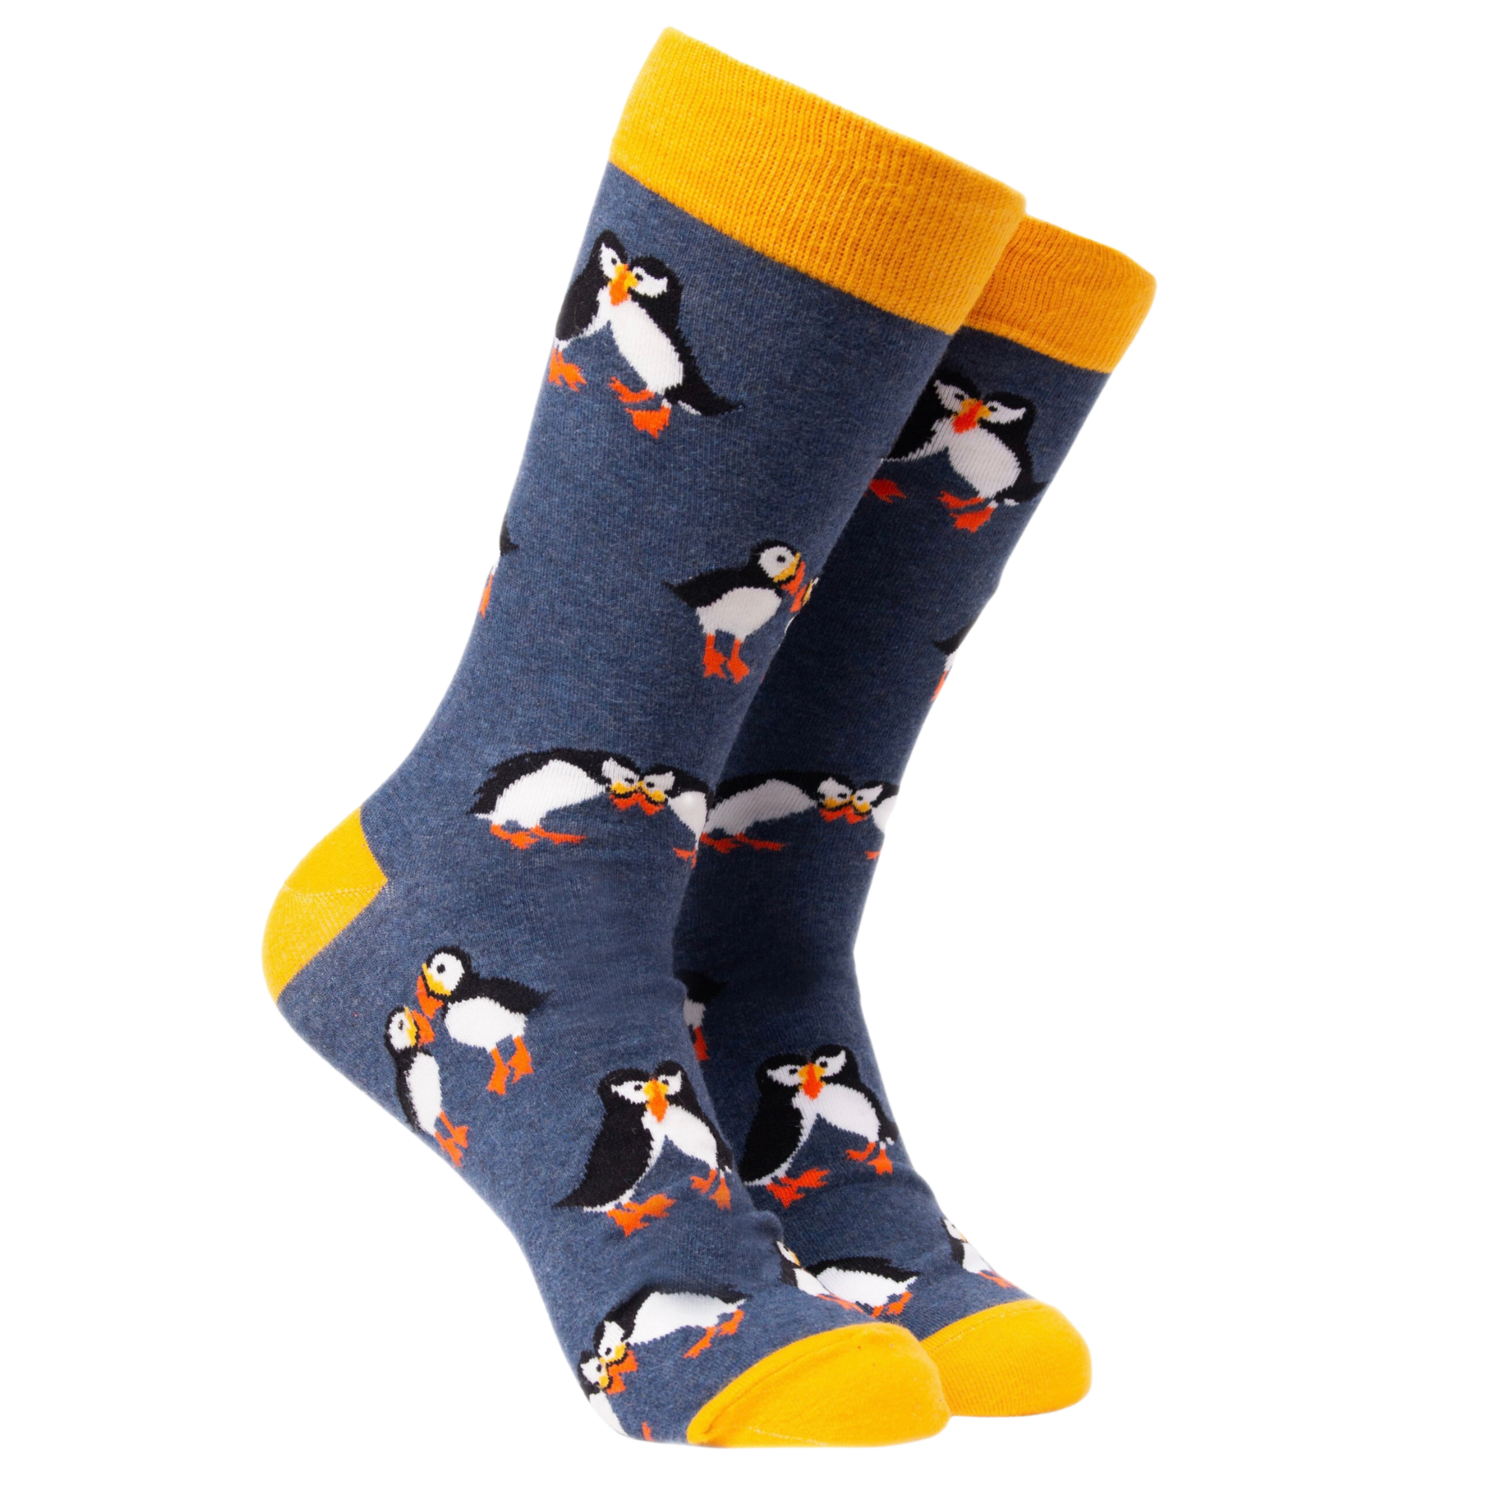 Puffin Socks Mates For Life Socks Blue Soft Cotton Blend Size 4 to 8 So Cute